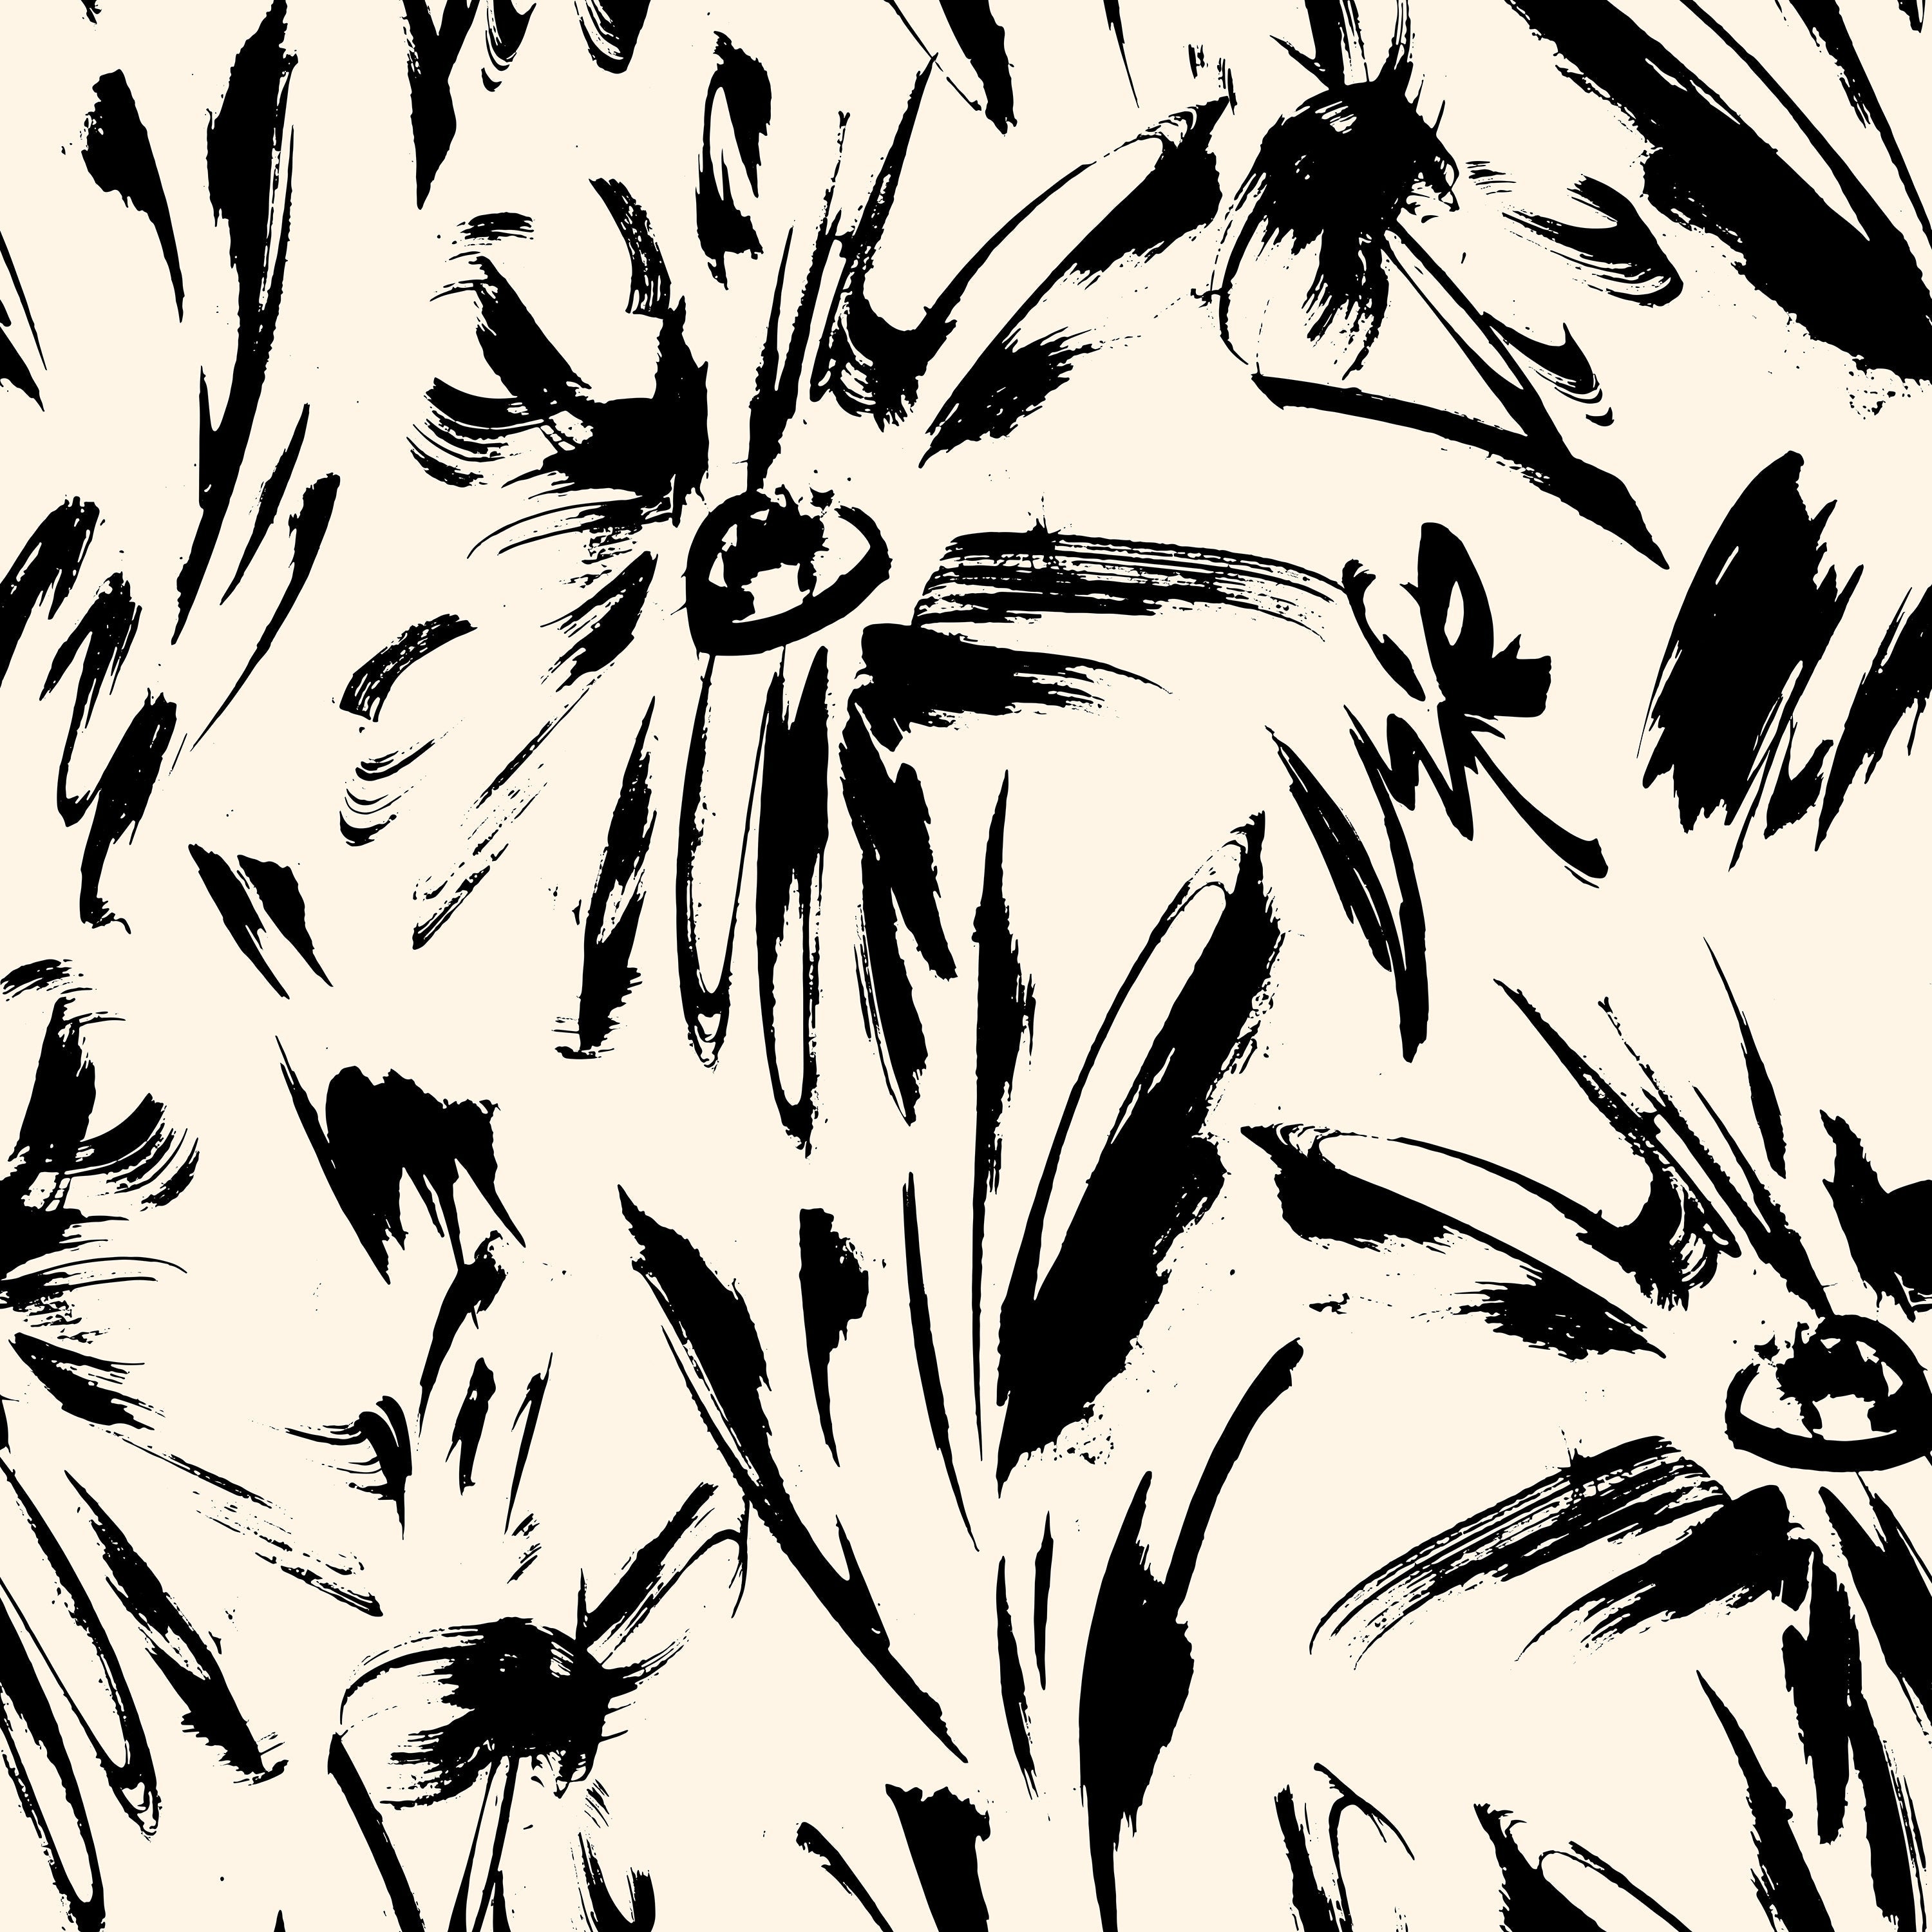 Close-up view of the Modern Floral Sketch Wallpaper - 25", featuring bold black brushstroke floral designs on a white background. The abstract and expressive style of the flowers adds a dynamic and artistic touch to any space.